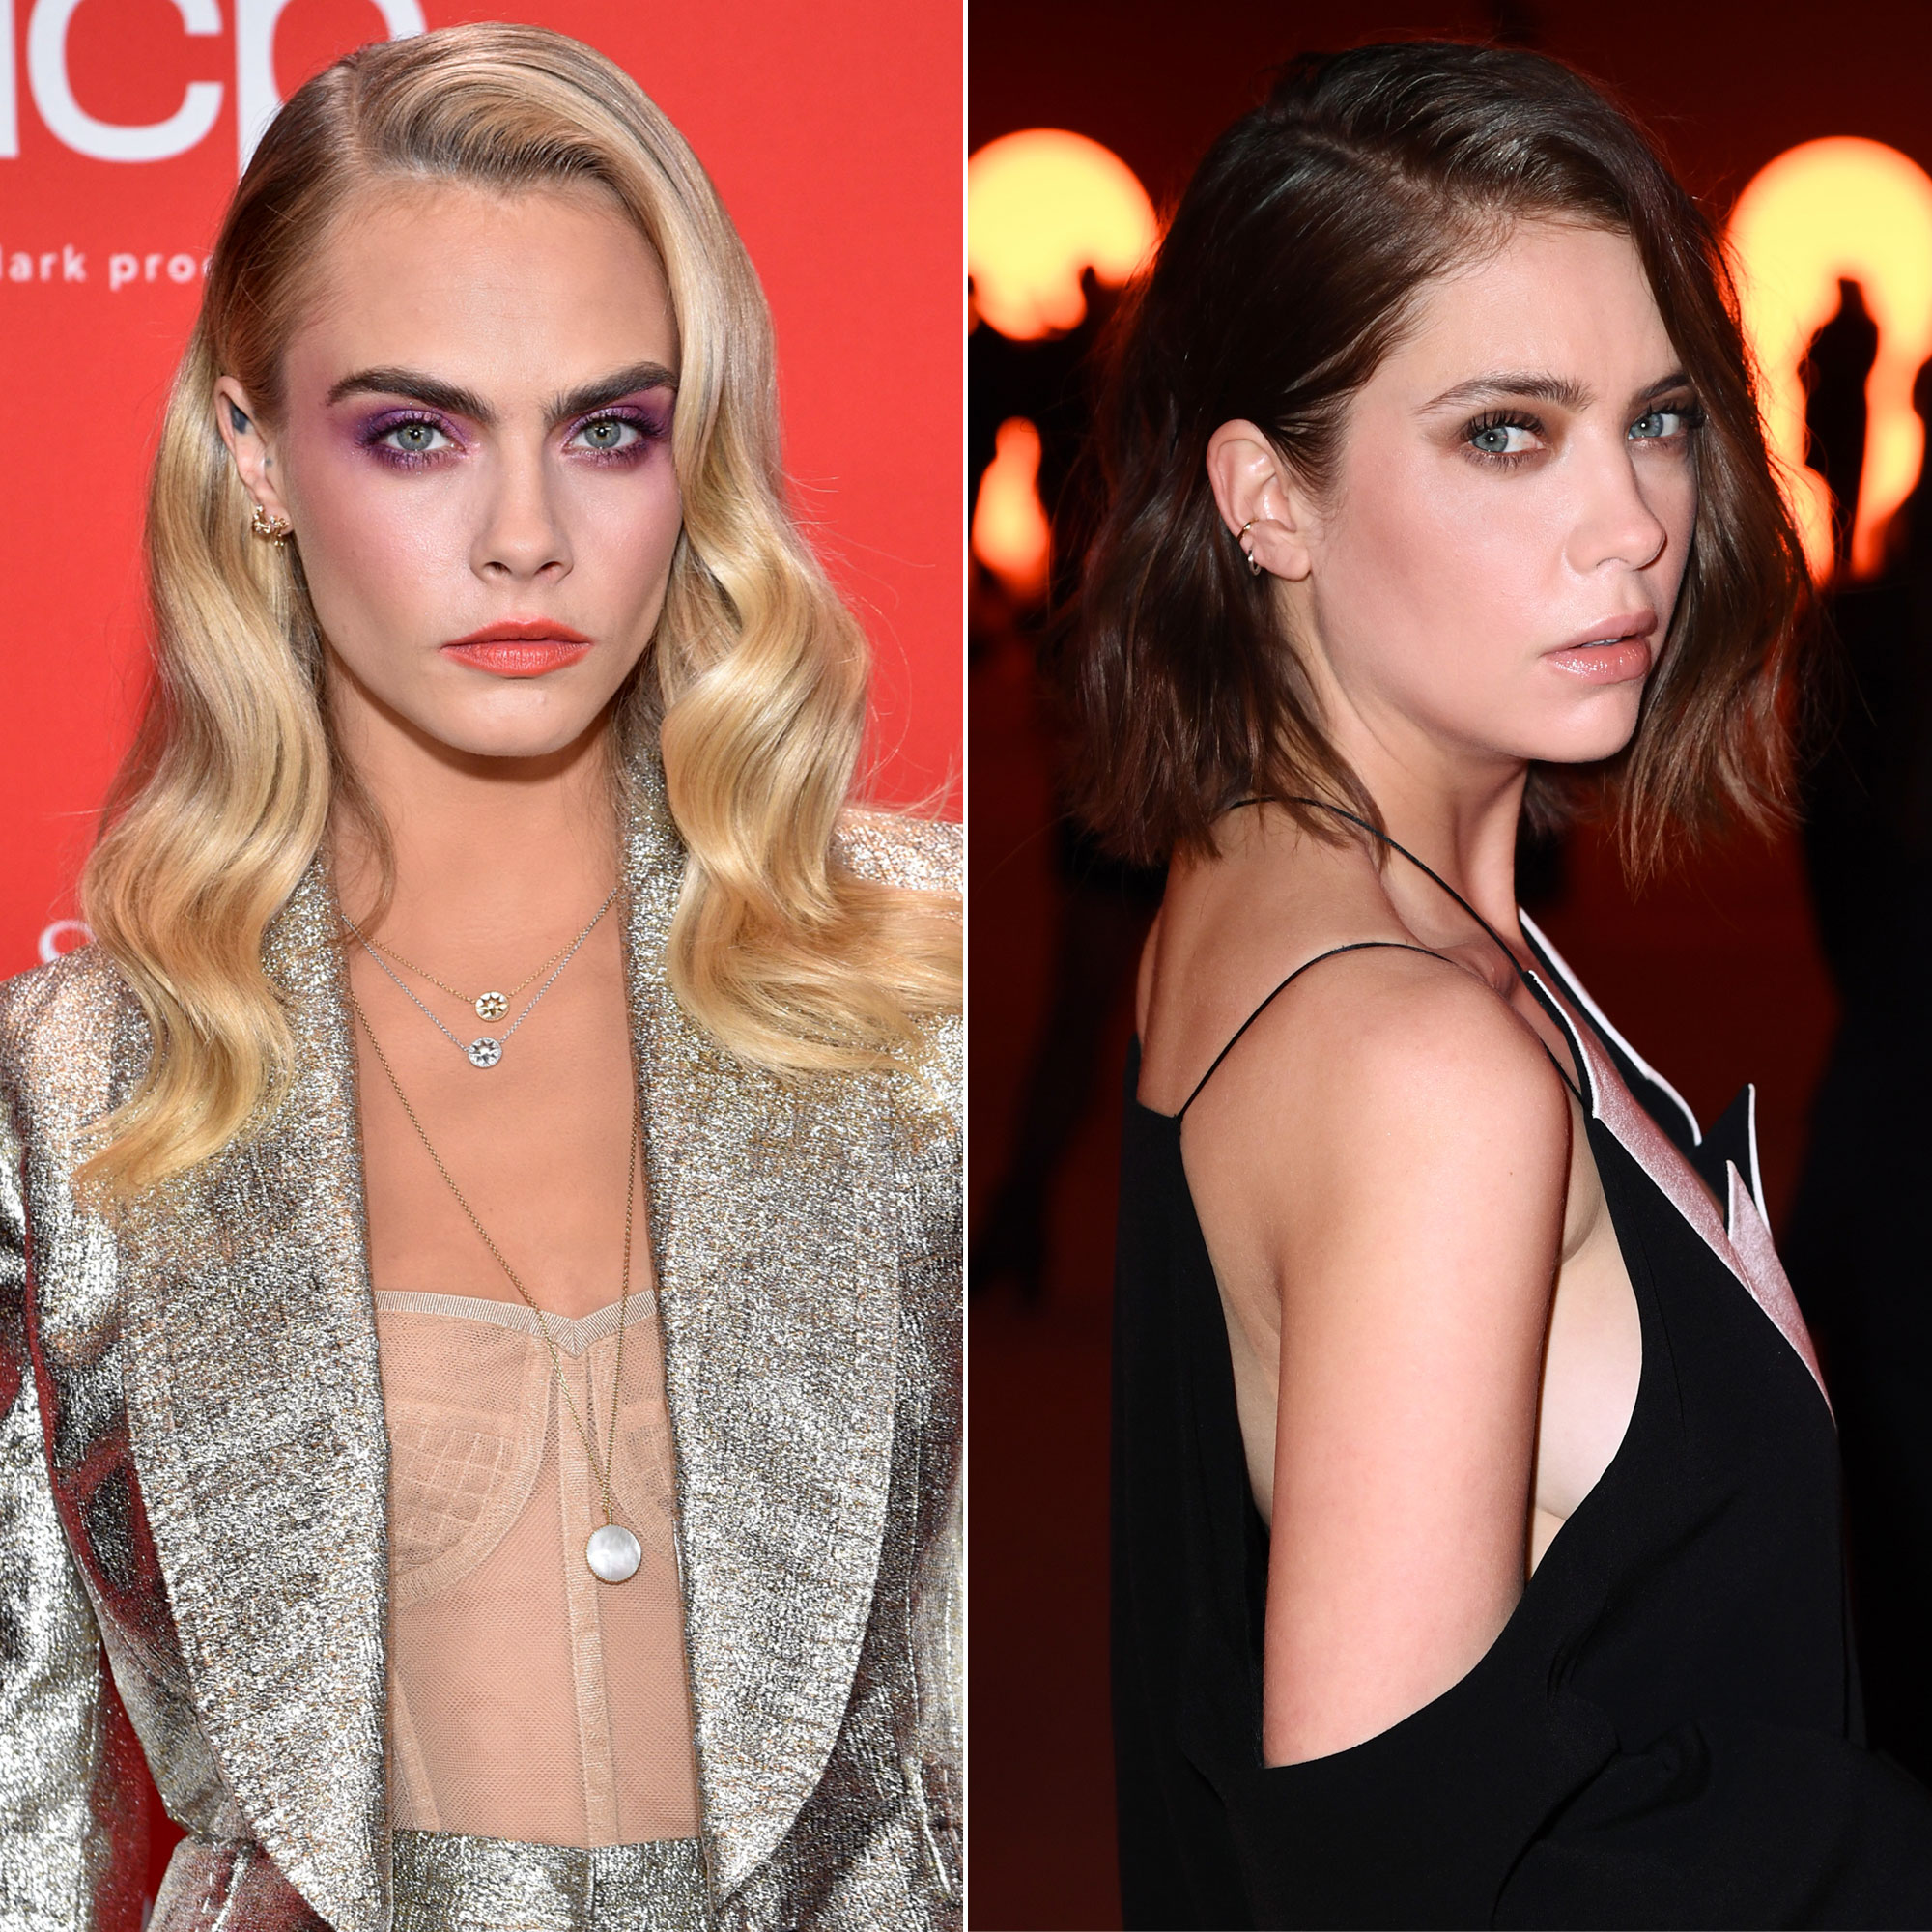 Cara Delevingne Reacts to Sex Bench Pics With Ashley Benson image pic